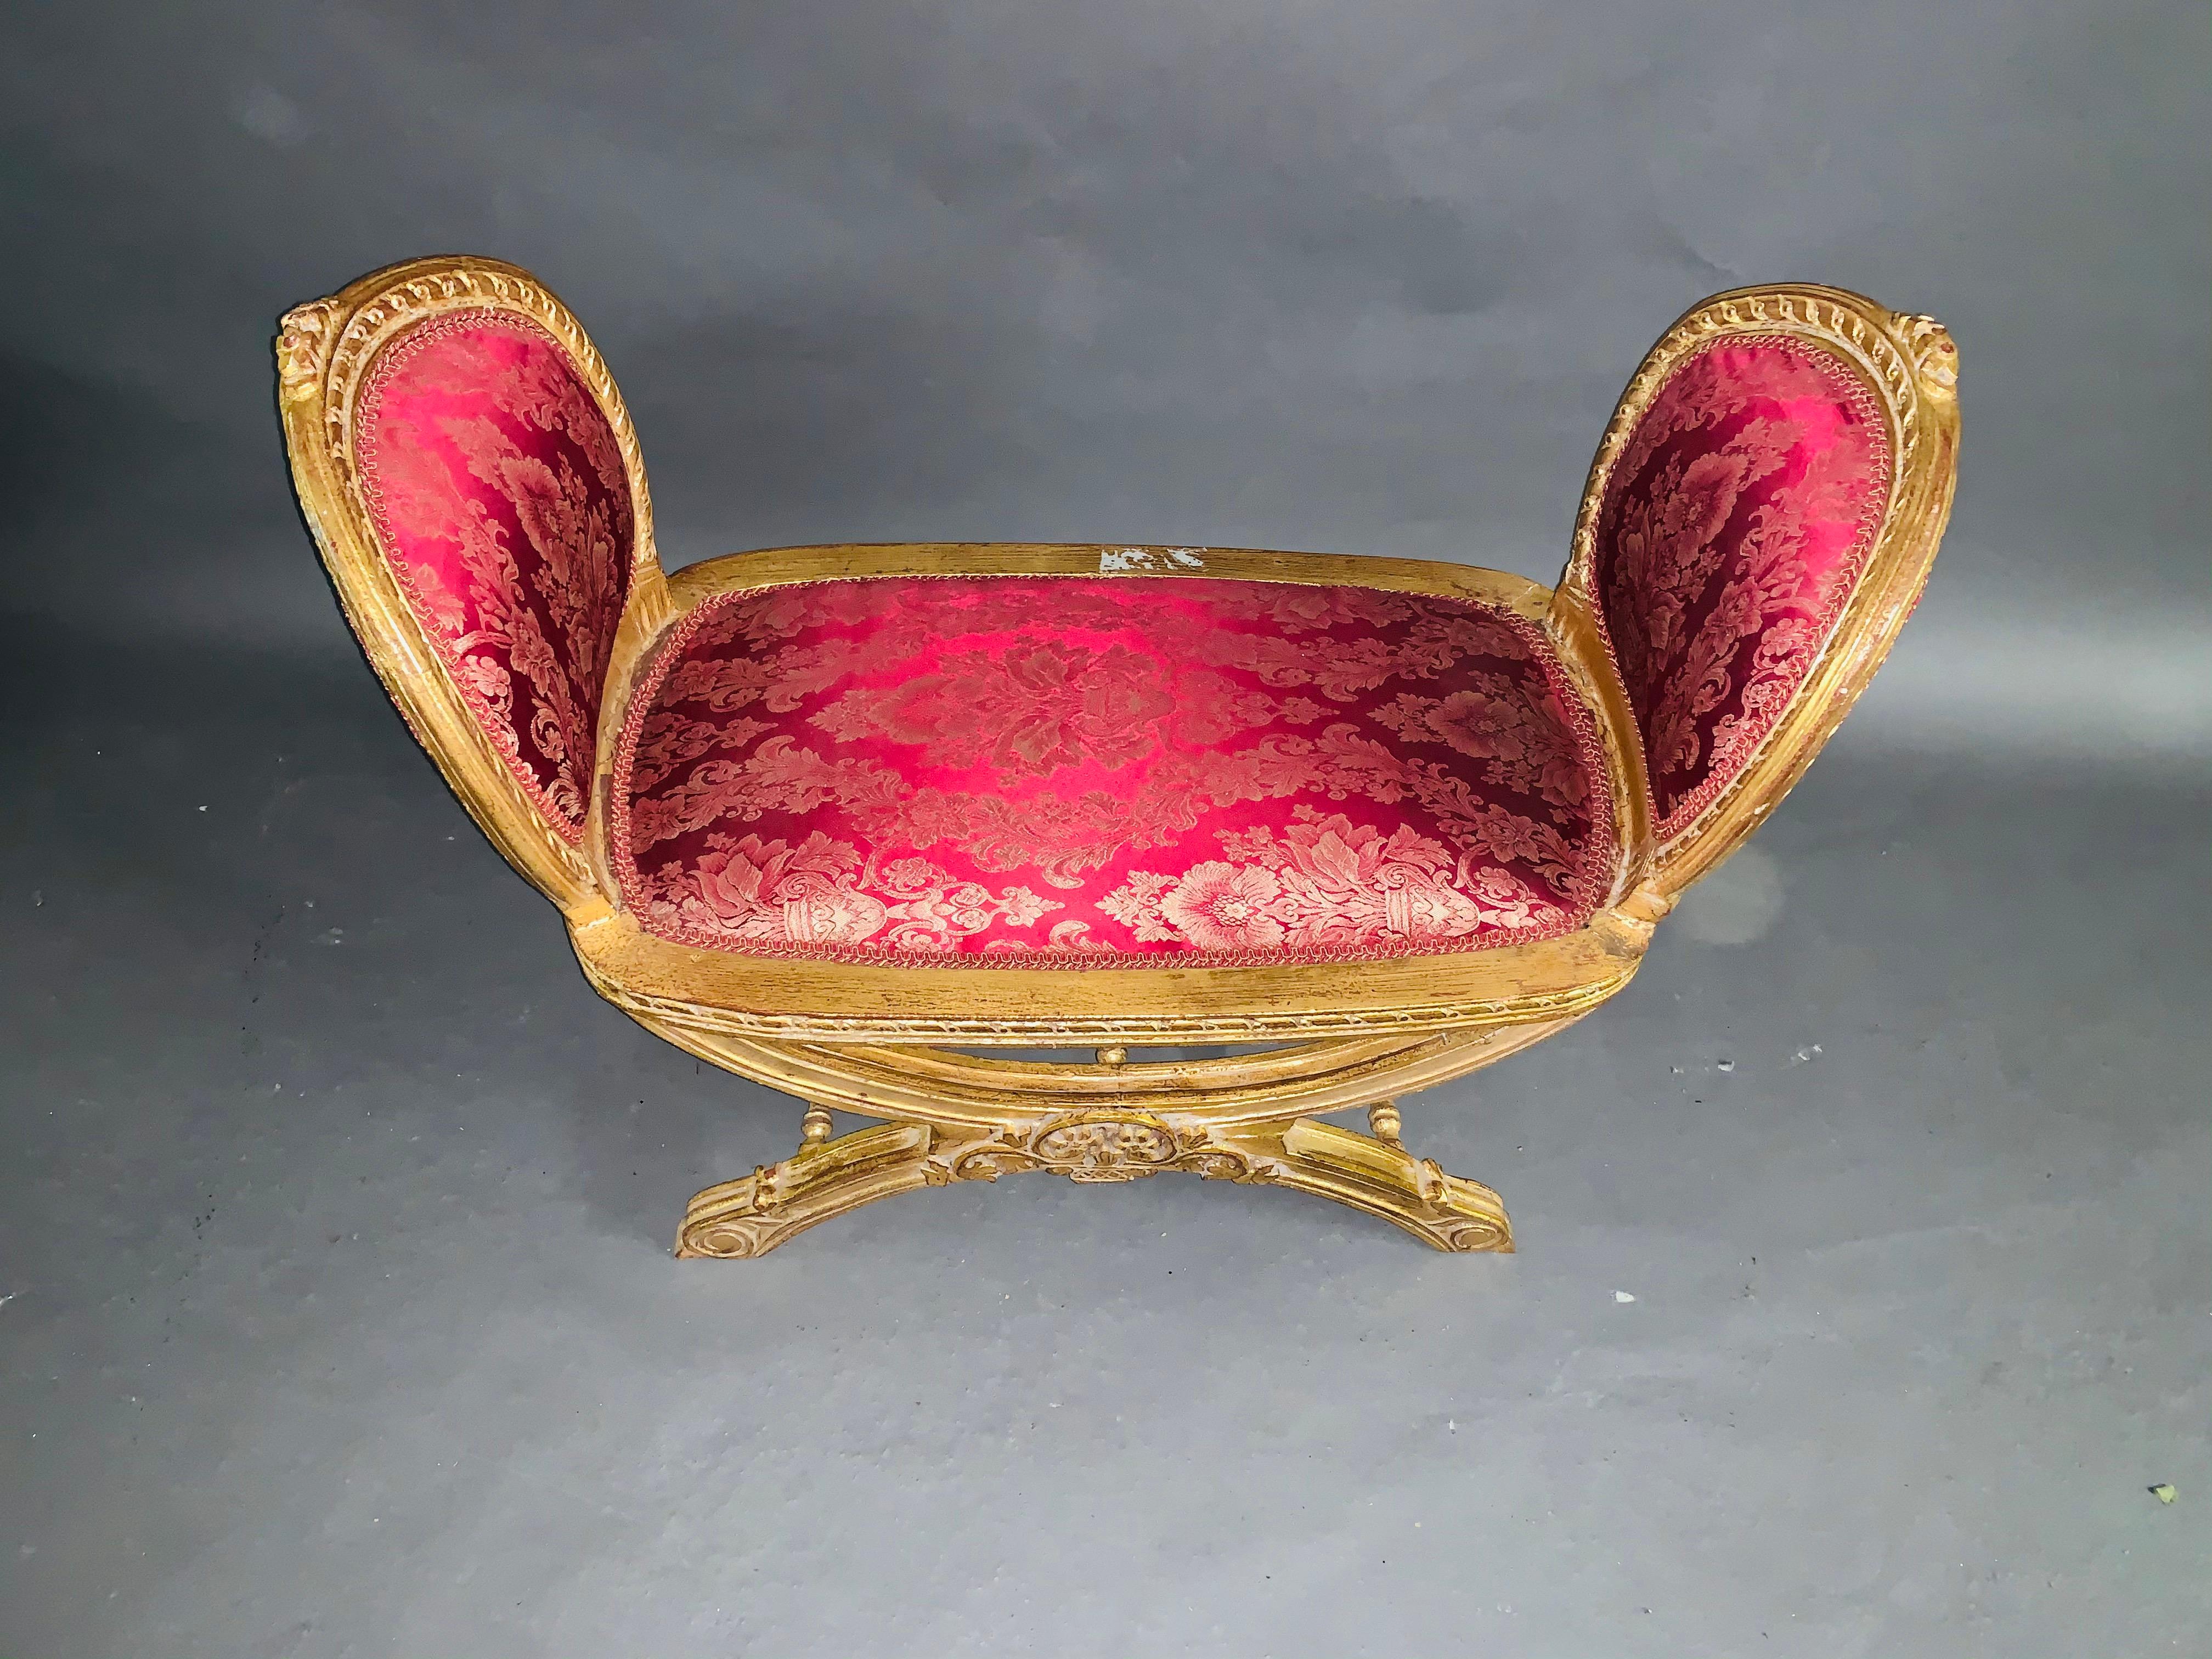 French bench, Gondola in the Louis Seize XVI Solid beechwood, gilded with gold-plated trim, snug curly frame on four curved legs. The seat is finished with a historical, Classic upholstery. 

Measures: Height 82 cm
Width 99 cm
Depth 49 cm
Seat